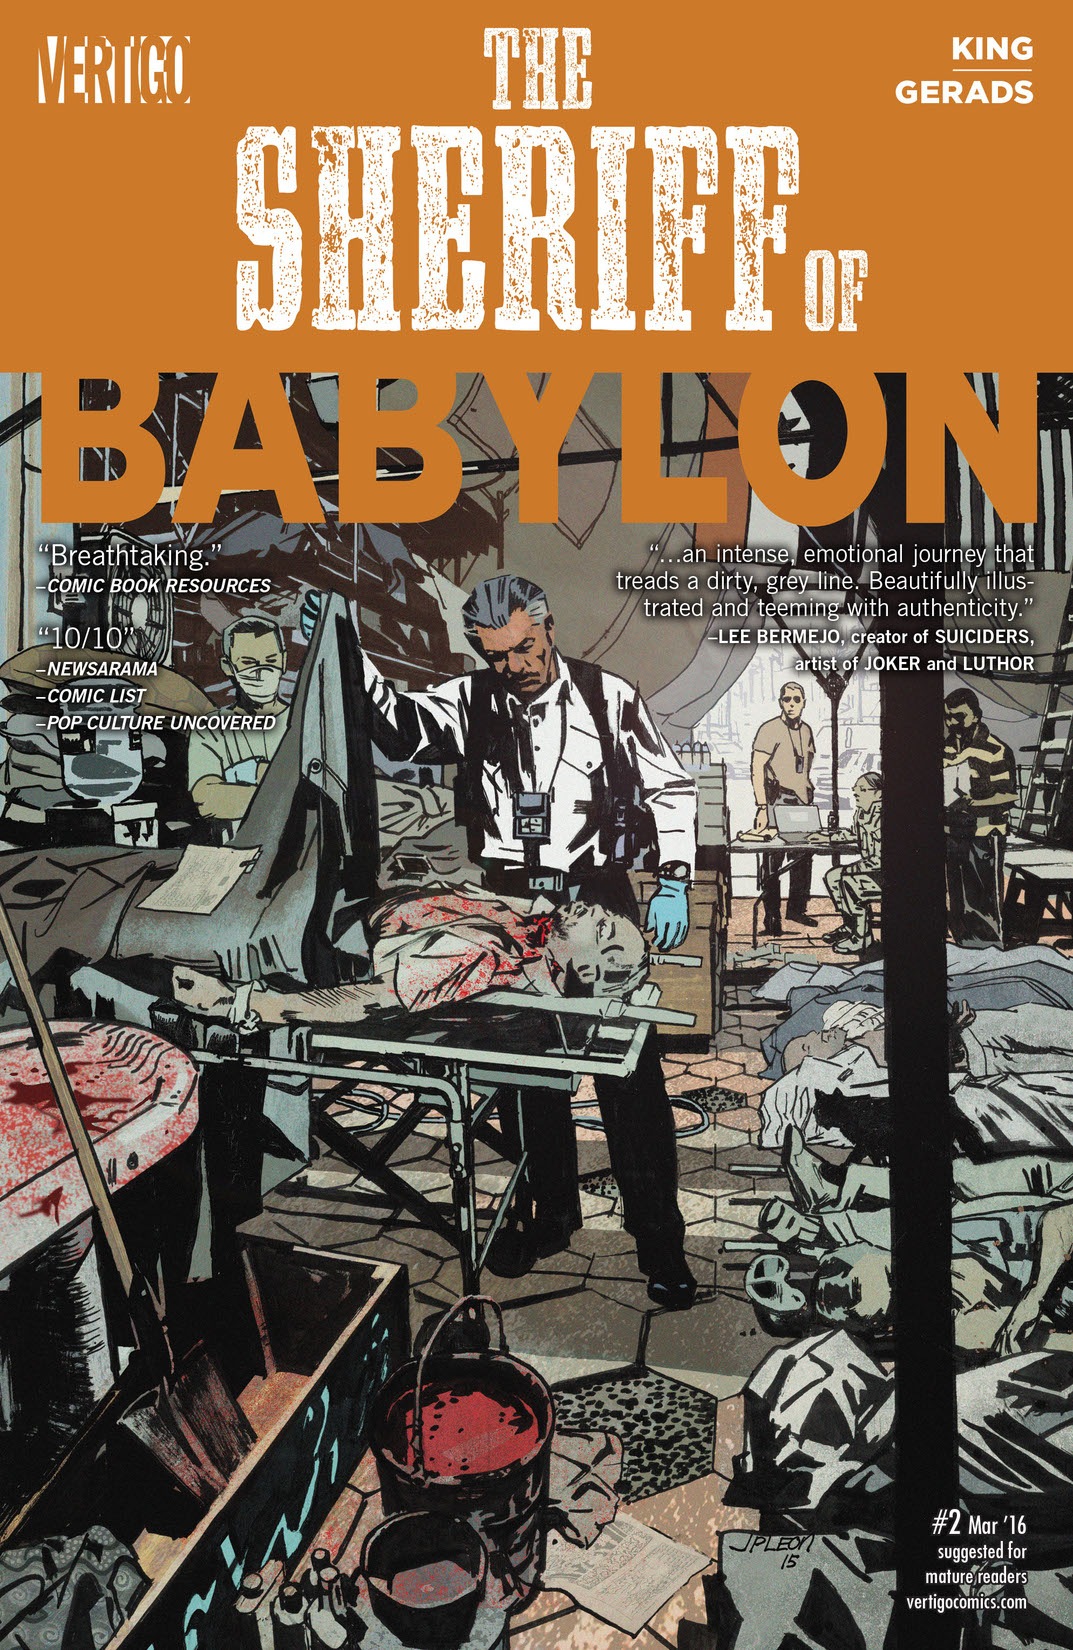 Sheriff of Babylon #2 preview images